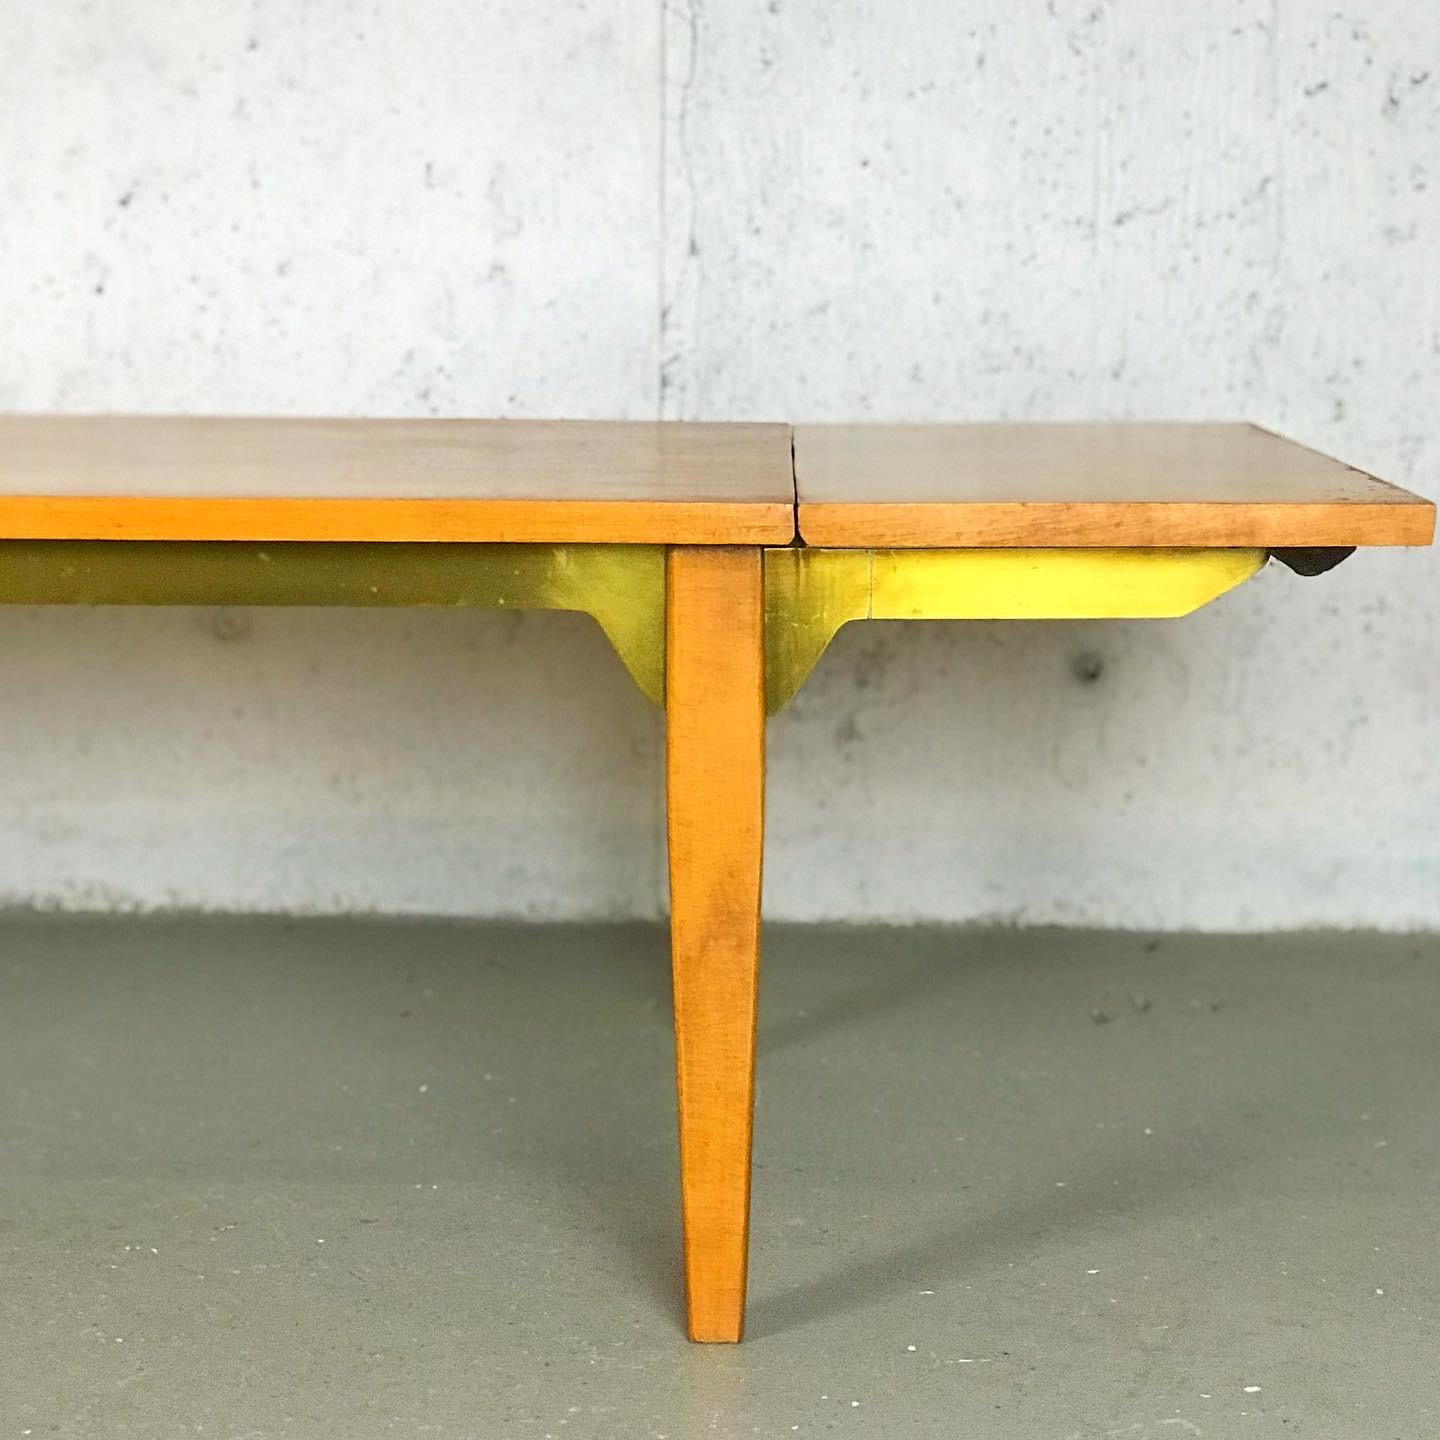 Rare drop leaf coffee table or bench by Milo Baughman for Murray Furniture. Murray Furniture was part of Winchendon Furniture Co. in Massachusetts that produced many of Paul McCobb's designs. These were not made for very long - one year - 1953 - and